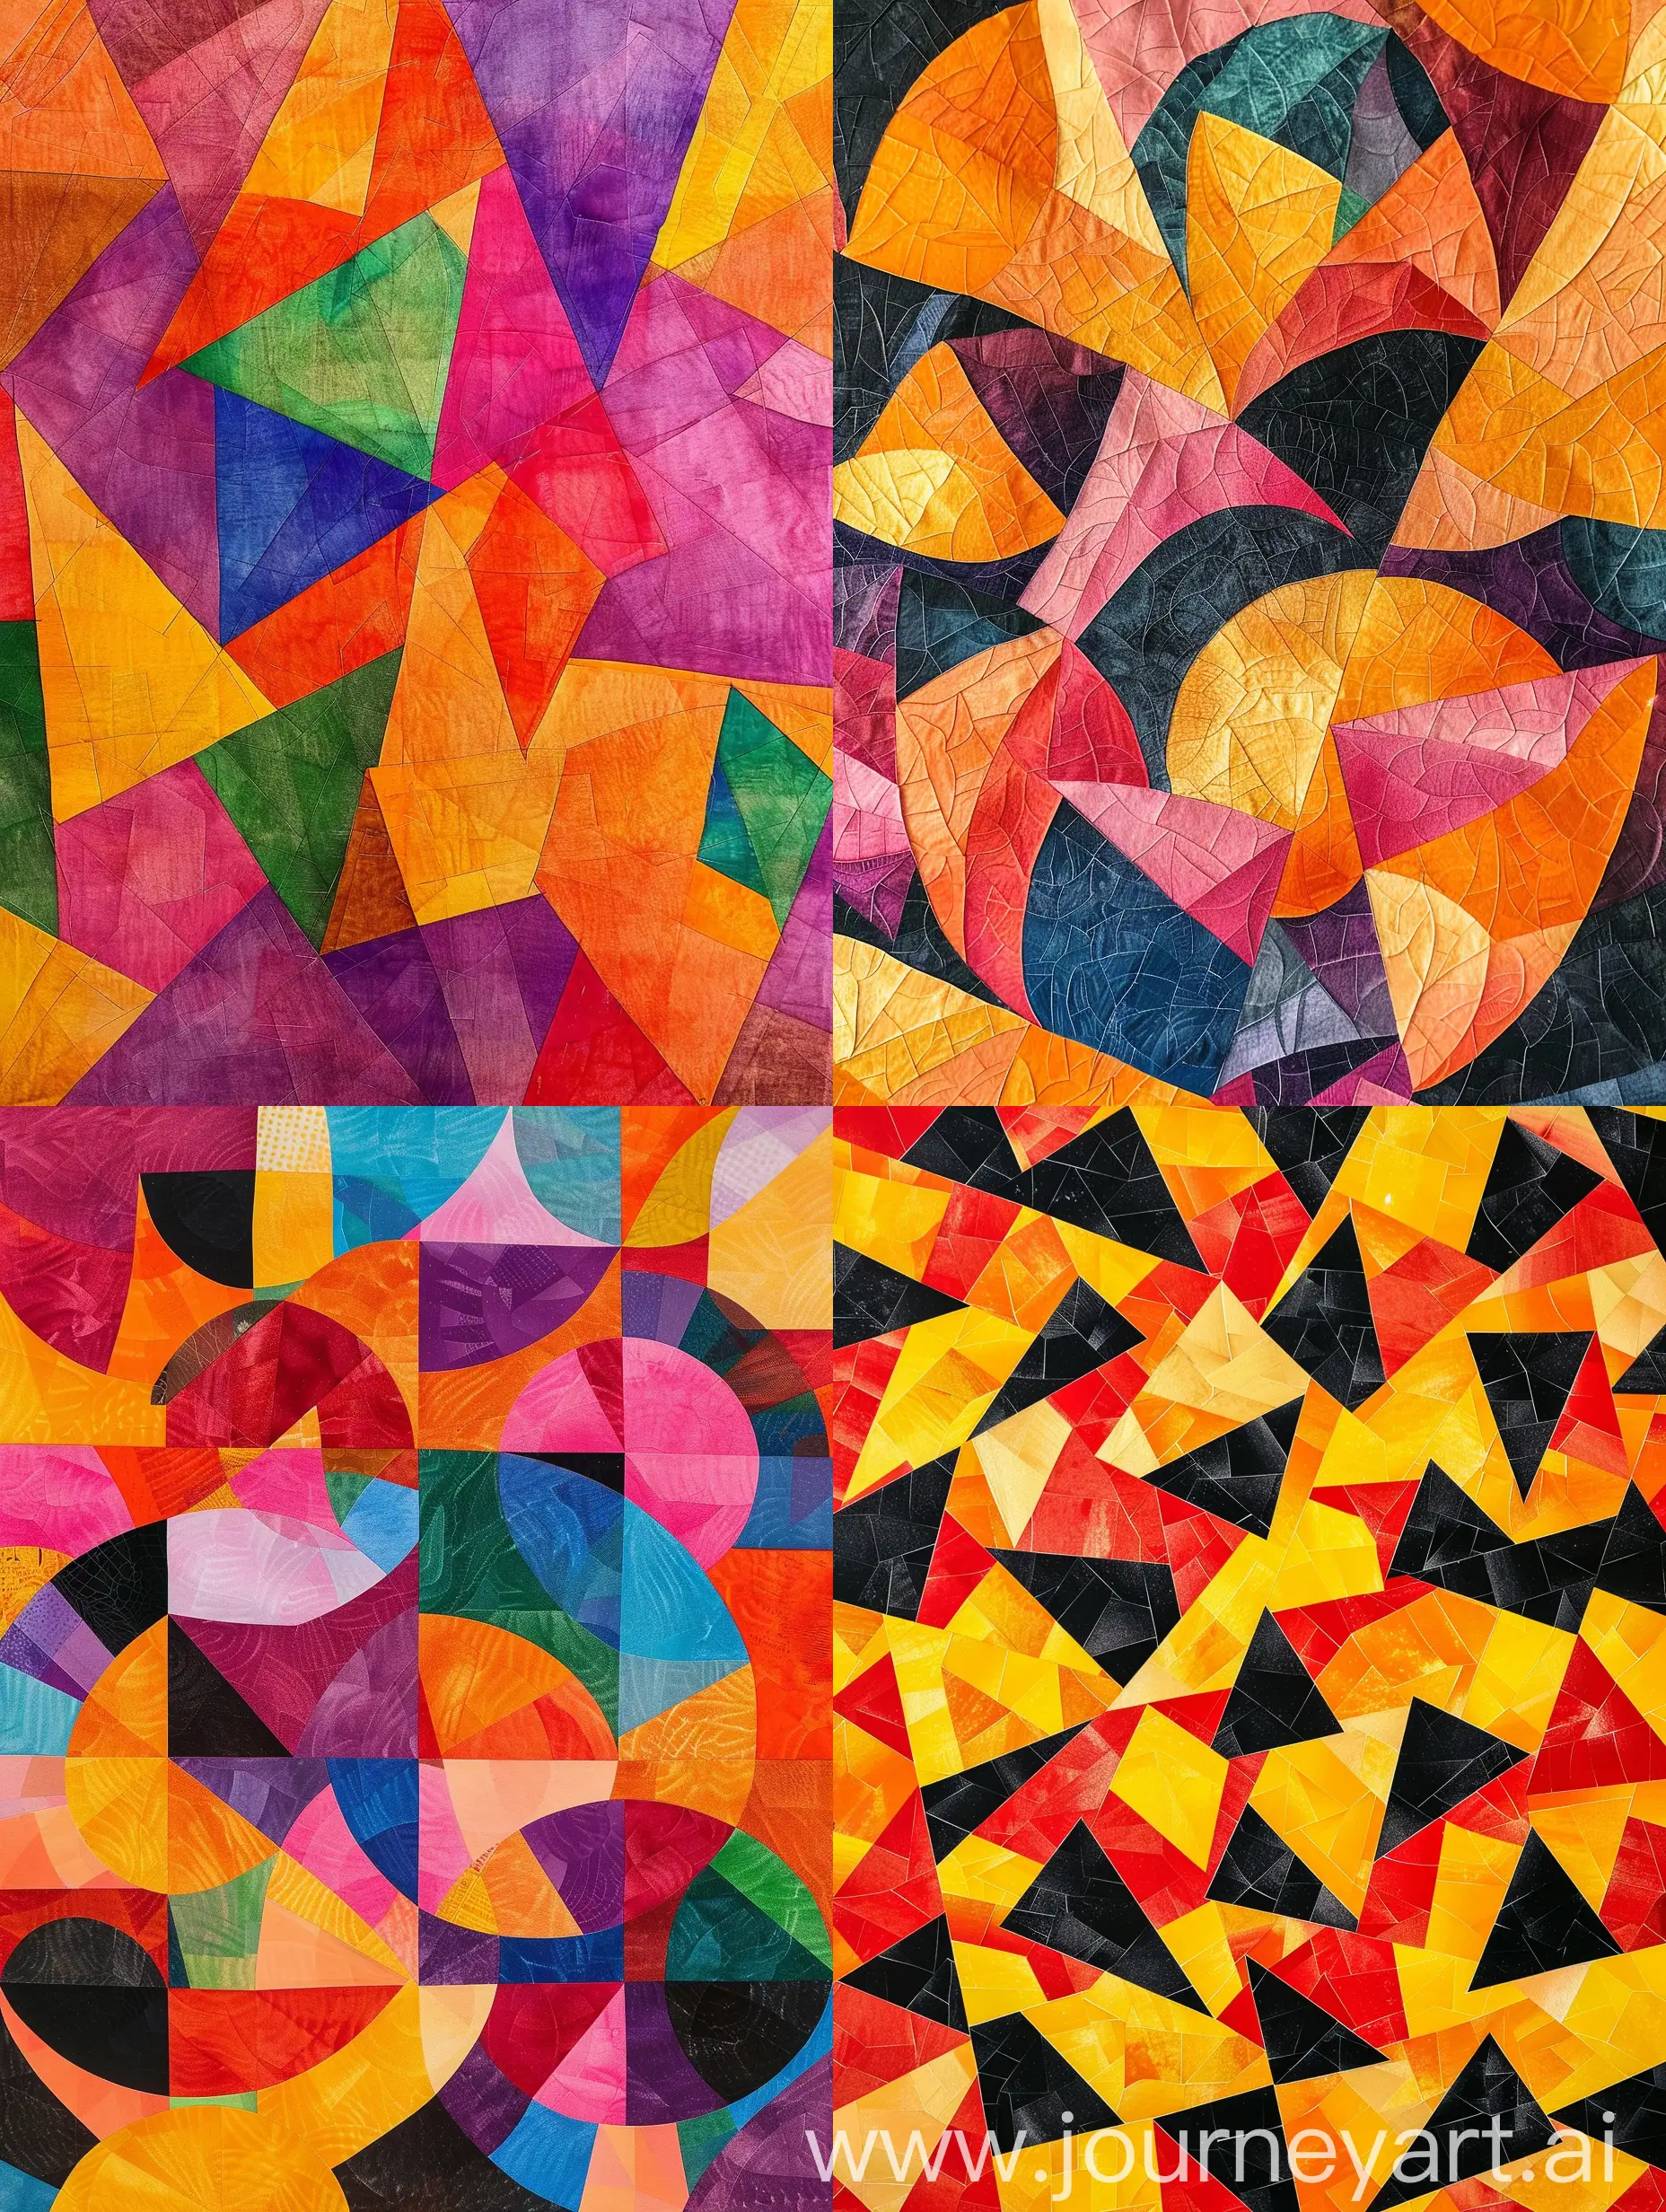 Colorful-Geometric-Joy-Potato-Chips-Art-Inspired-by-Sonia-Delaunay